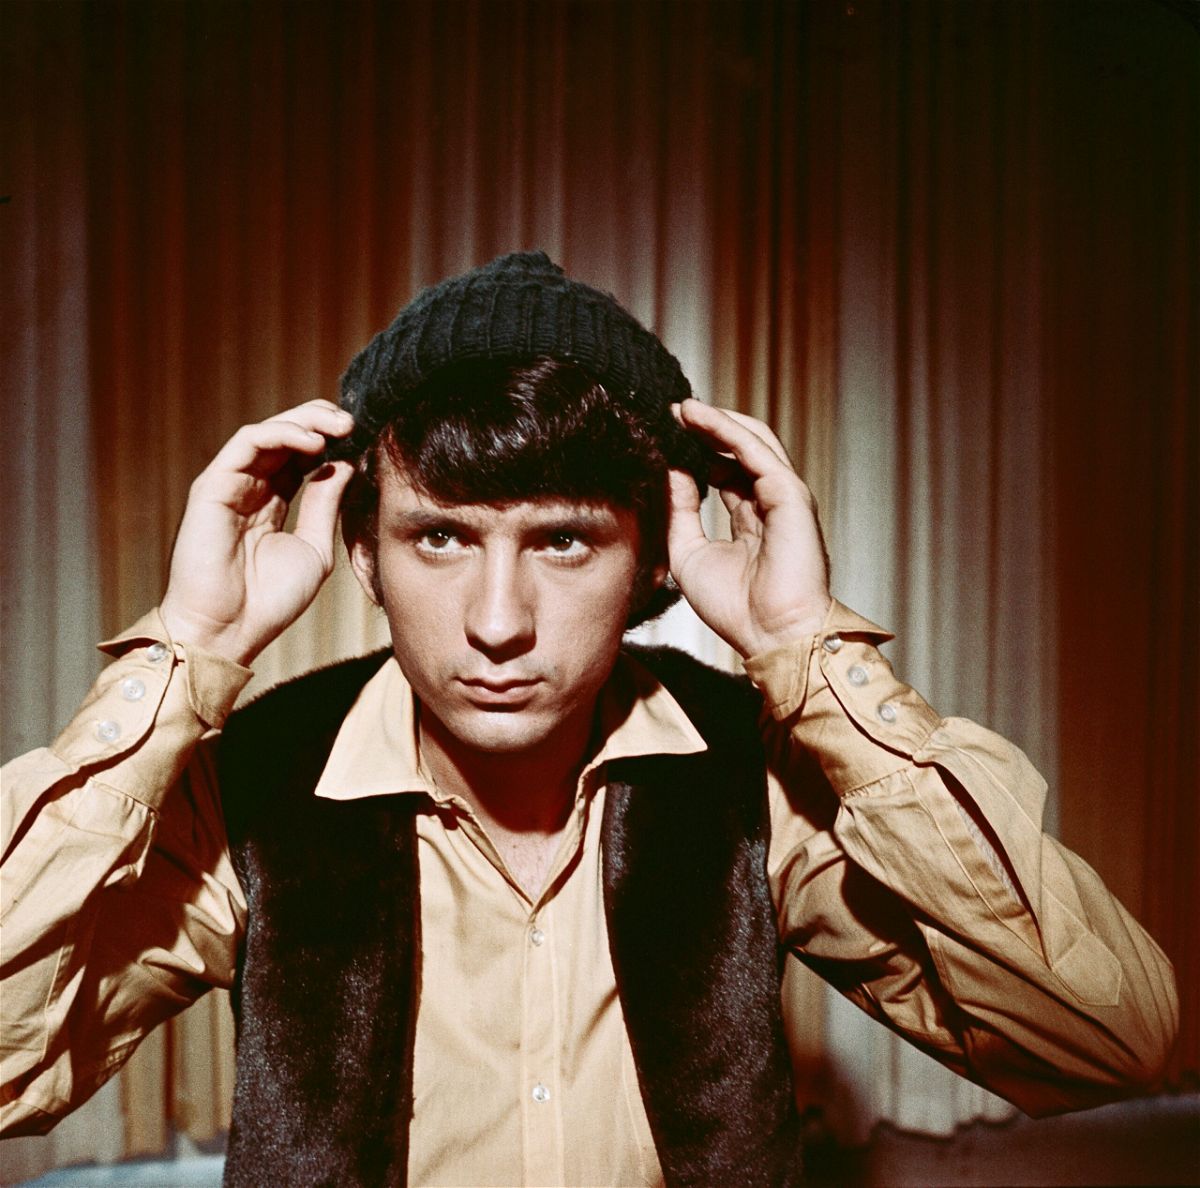 <i>Michael Ochs Archives/Getty Images</i><br/>Michael Nesmith